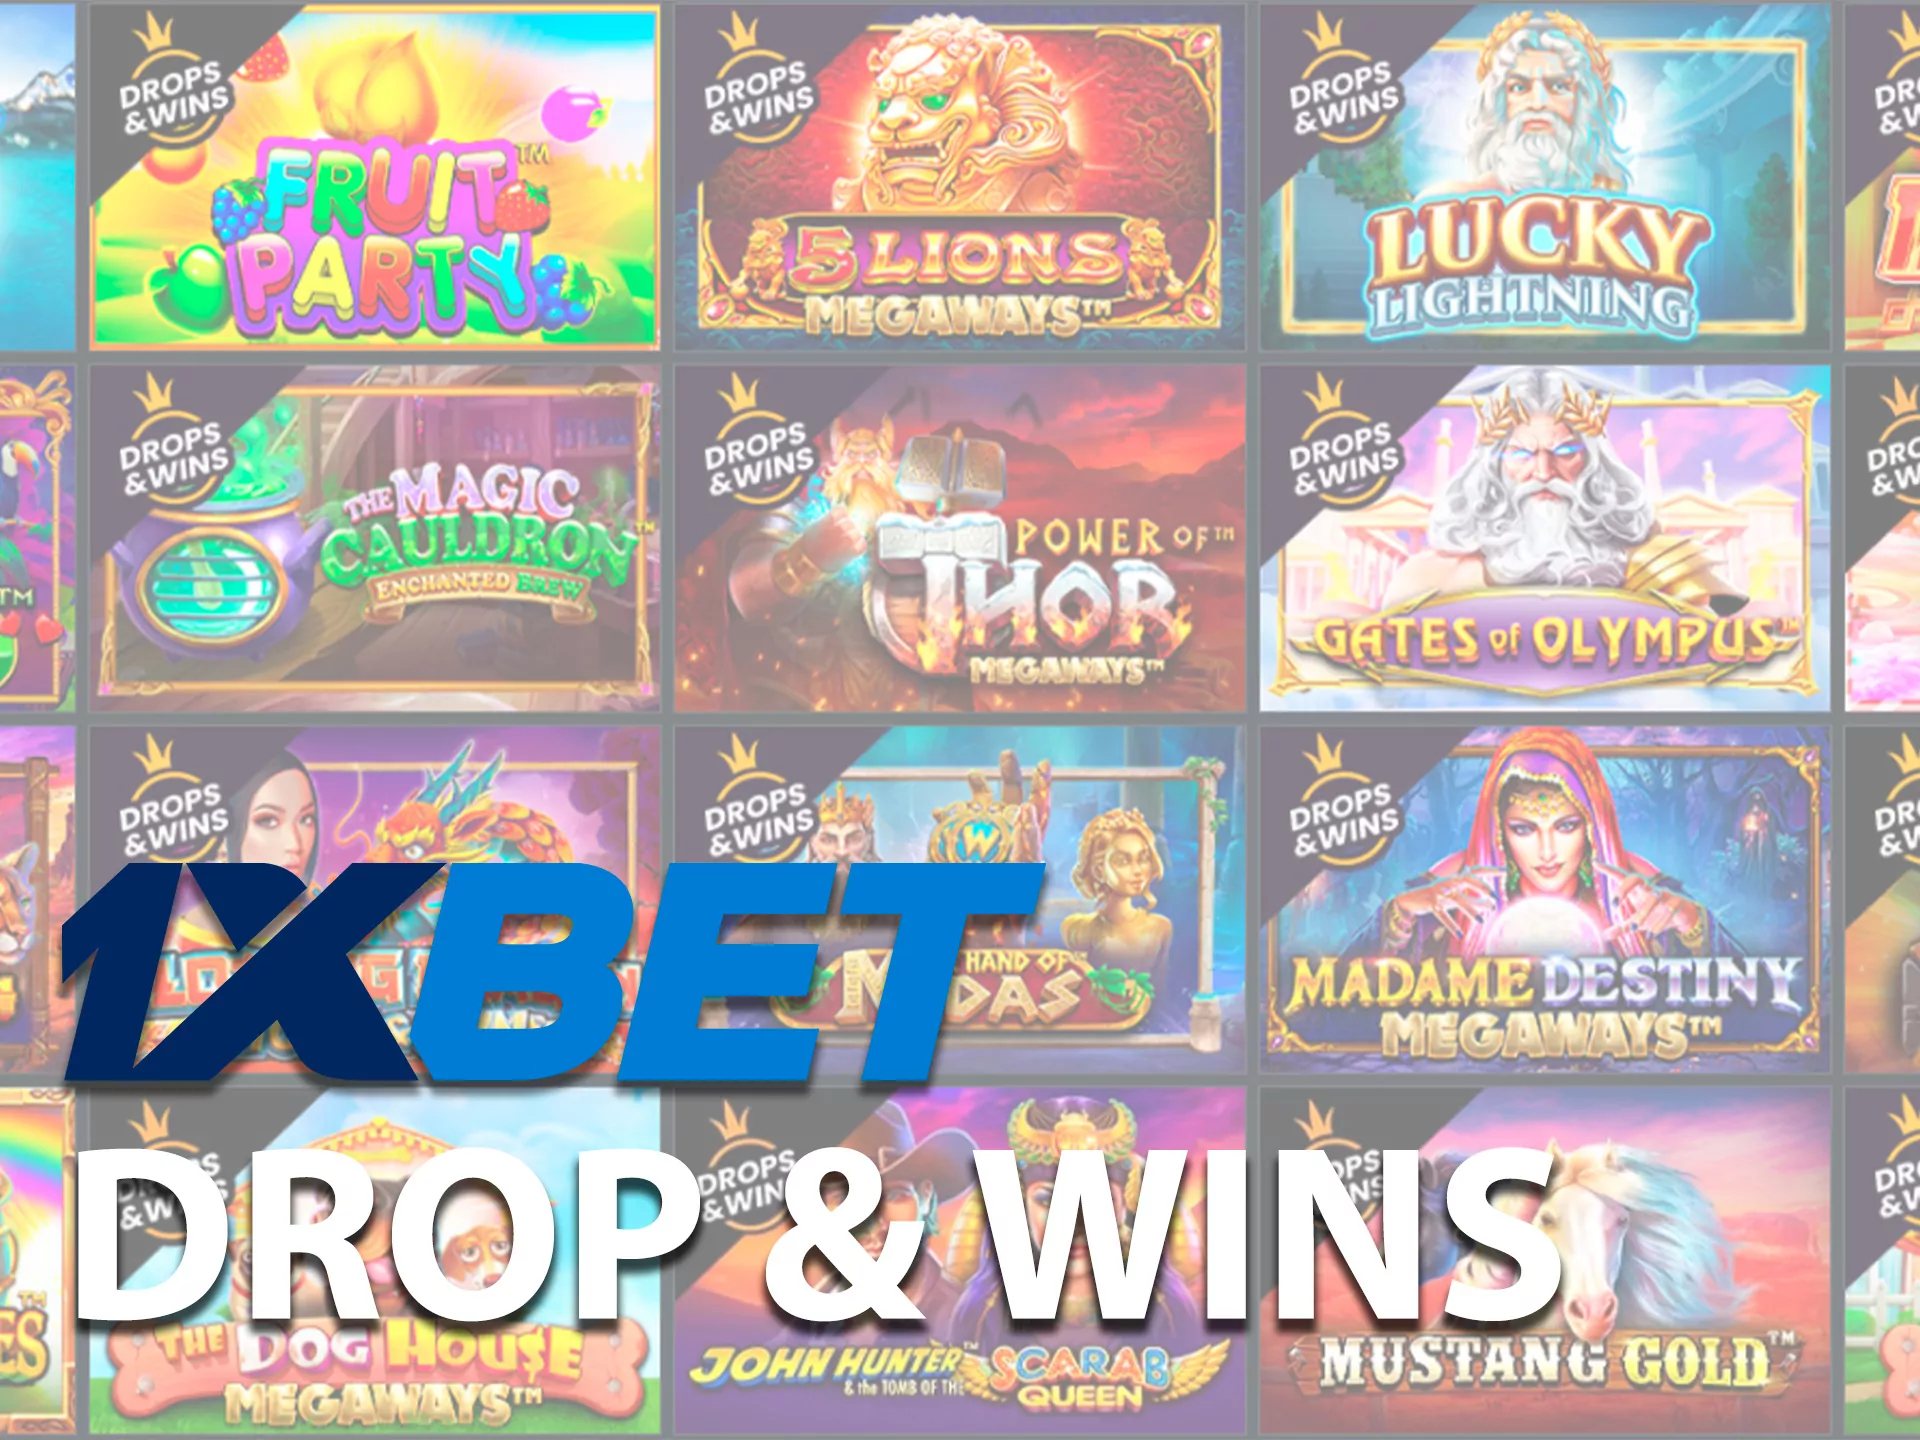 Register at the 1xbet online casino and play Drop and Wins from Pragmatic Play.